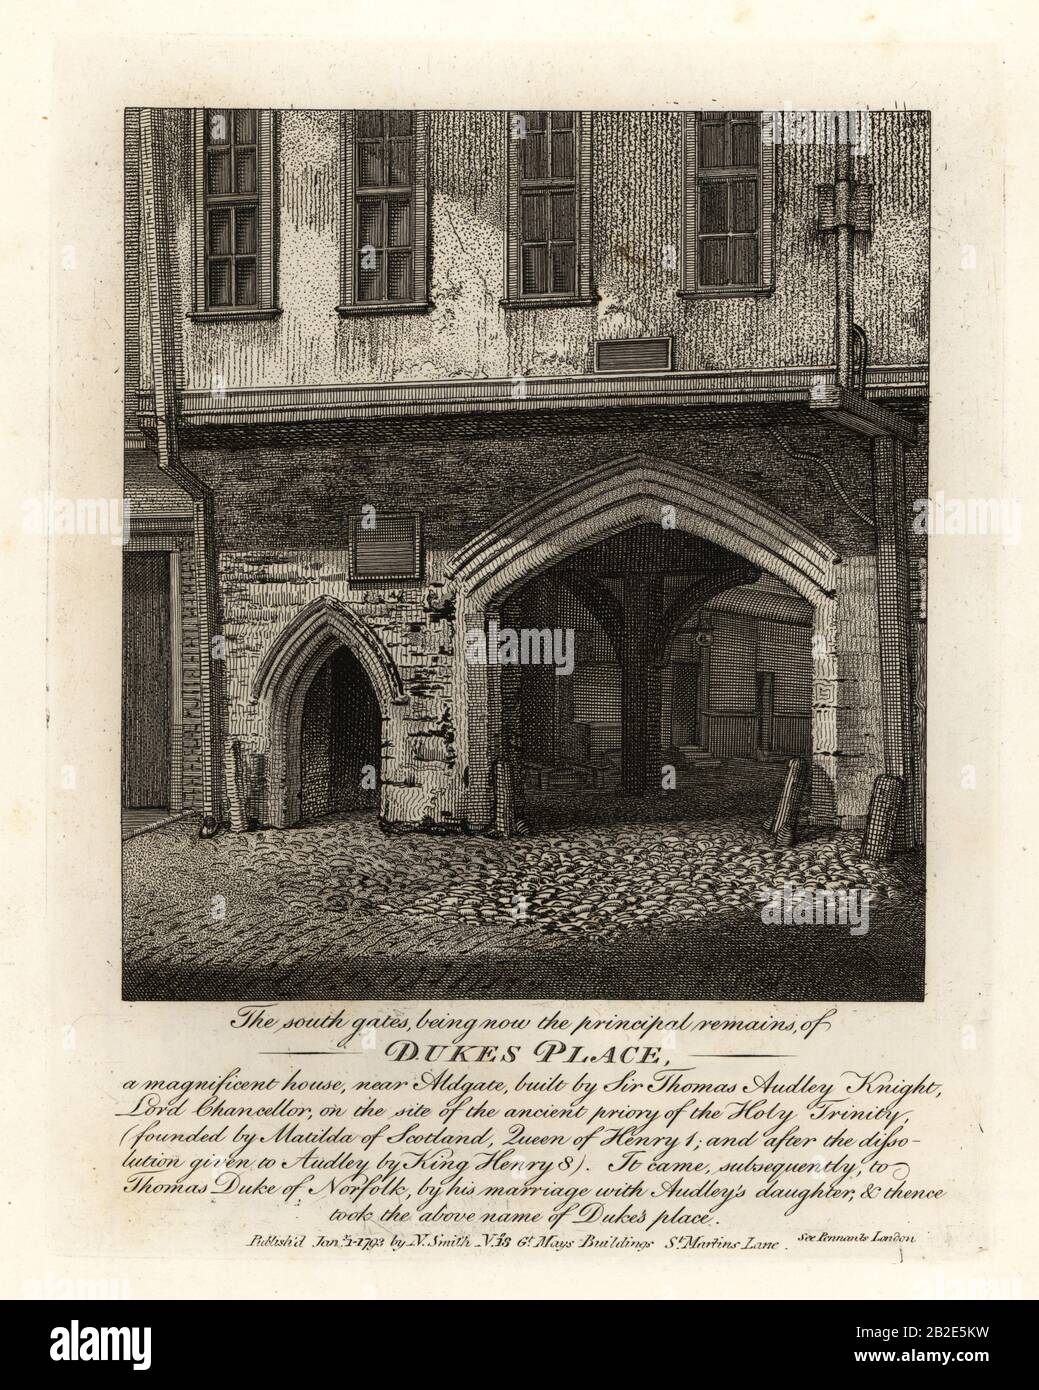 The ruins of the South Gates of Dukes Place, built by Sir Thomas Audley (1488-1544) near Aldgate. Copperplate engraving by John Thomas Smith after original drawings by members of the Society of Antiquaries from his J.T. Smith’s Antiquities of London and its Environs, J. Sewell, R. Folder, J. Simco, London, 1793. Stock Photo